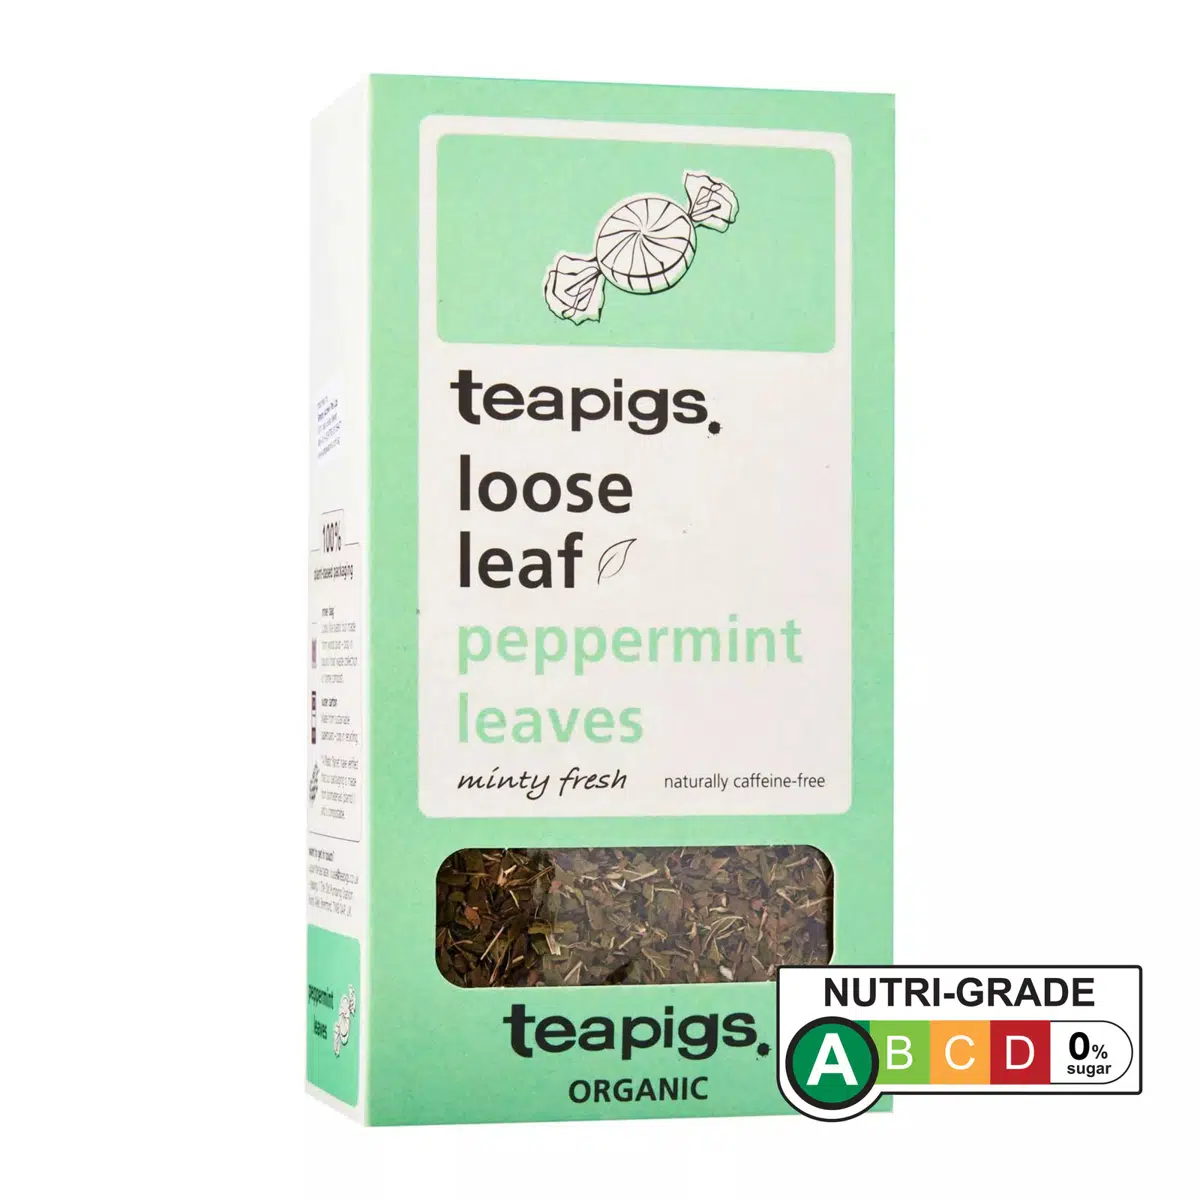 Get Peppermint Tea Bag Online Today to Stay Healthy Tomorrow